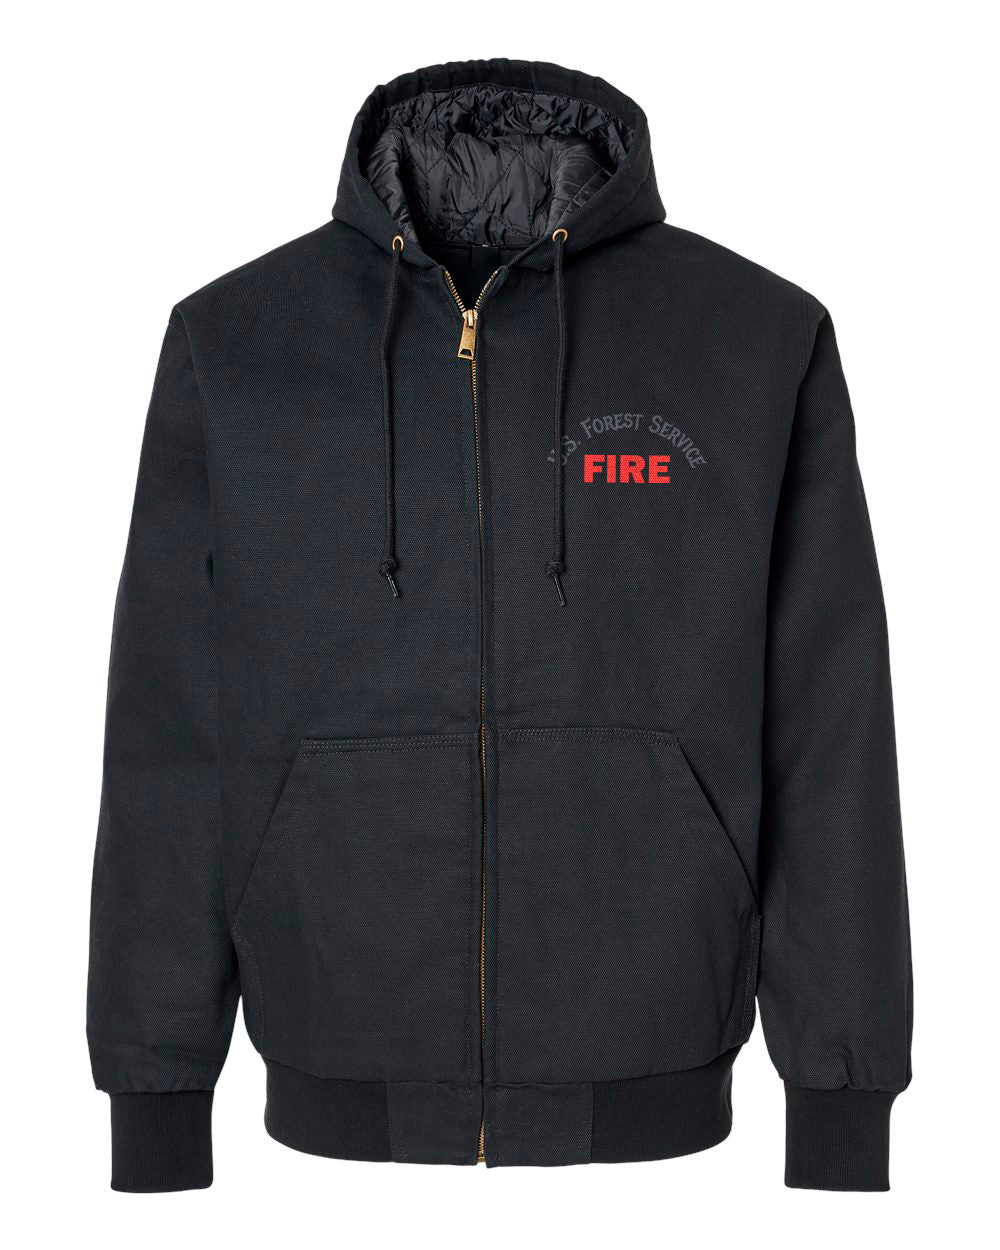 USFS FIRE -INSULATED CANVAS JACKET-BLACK